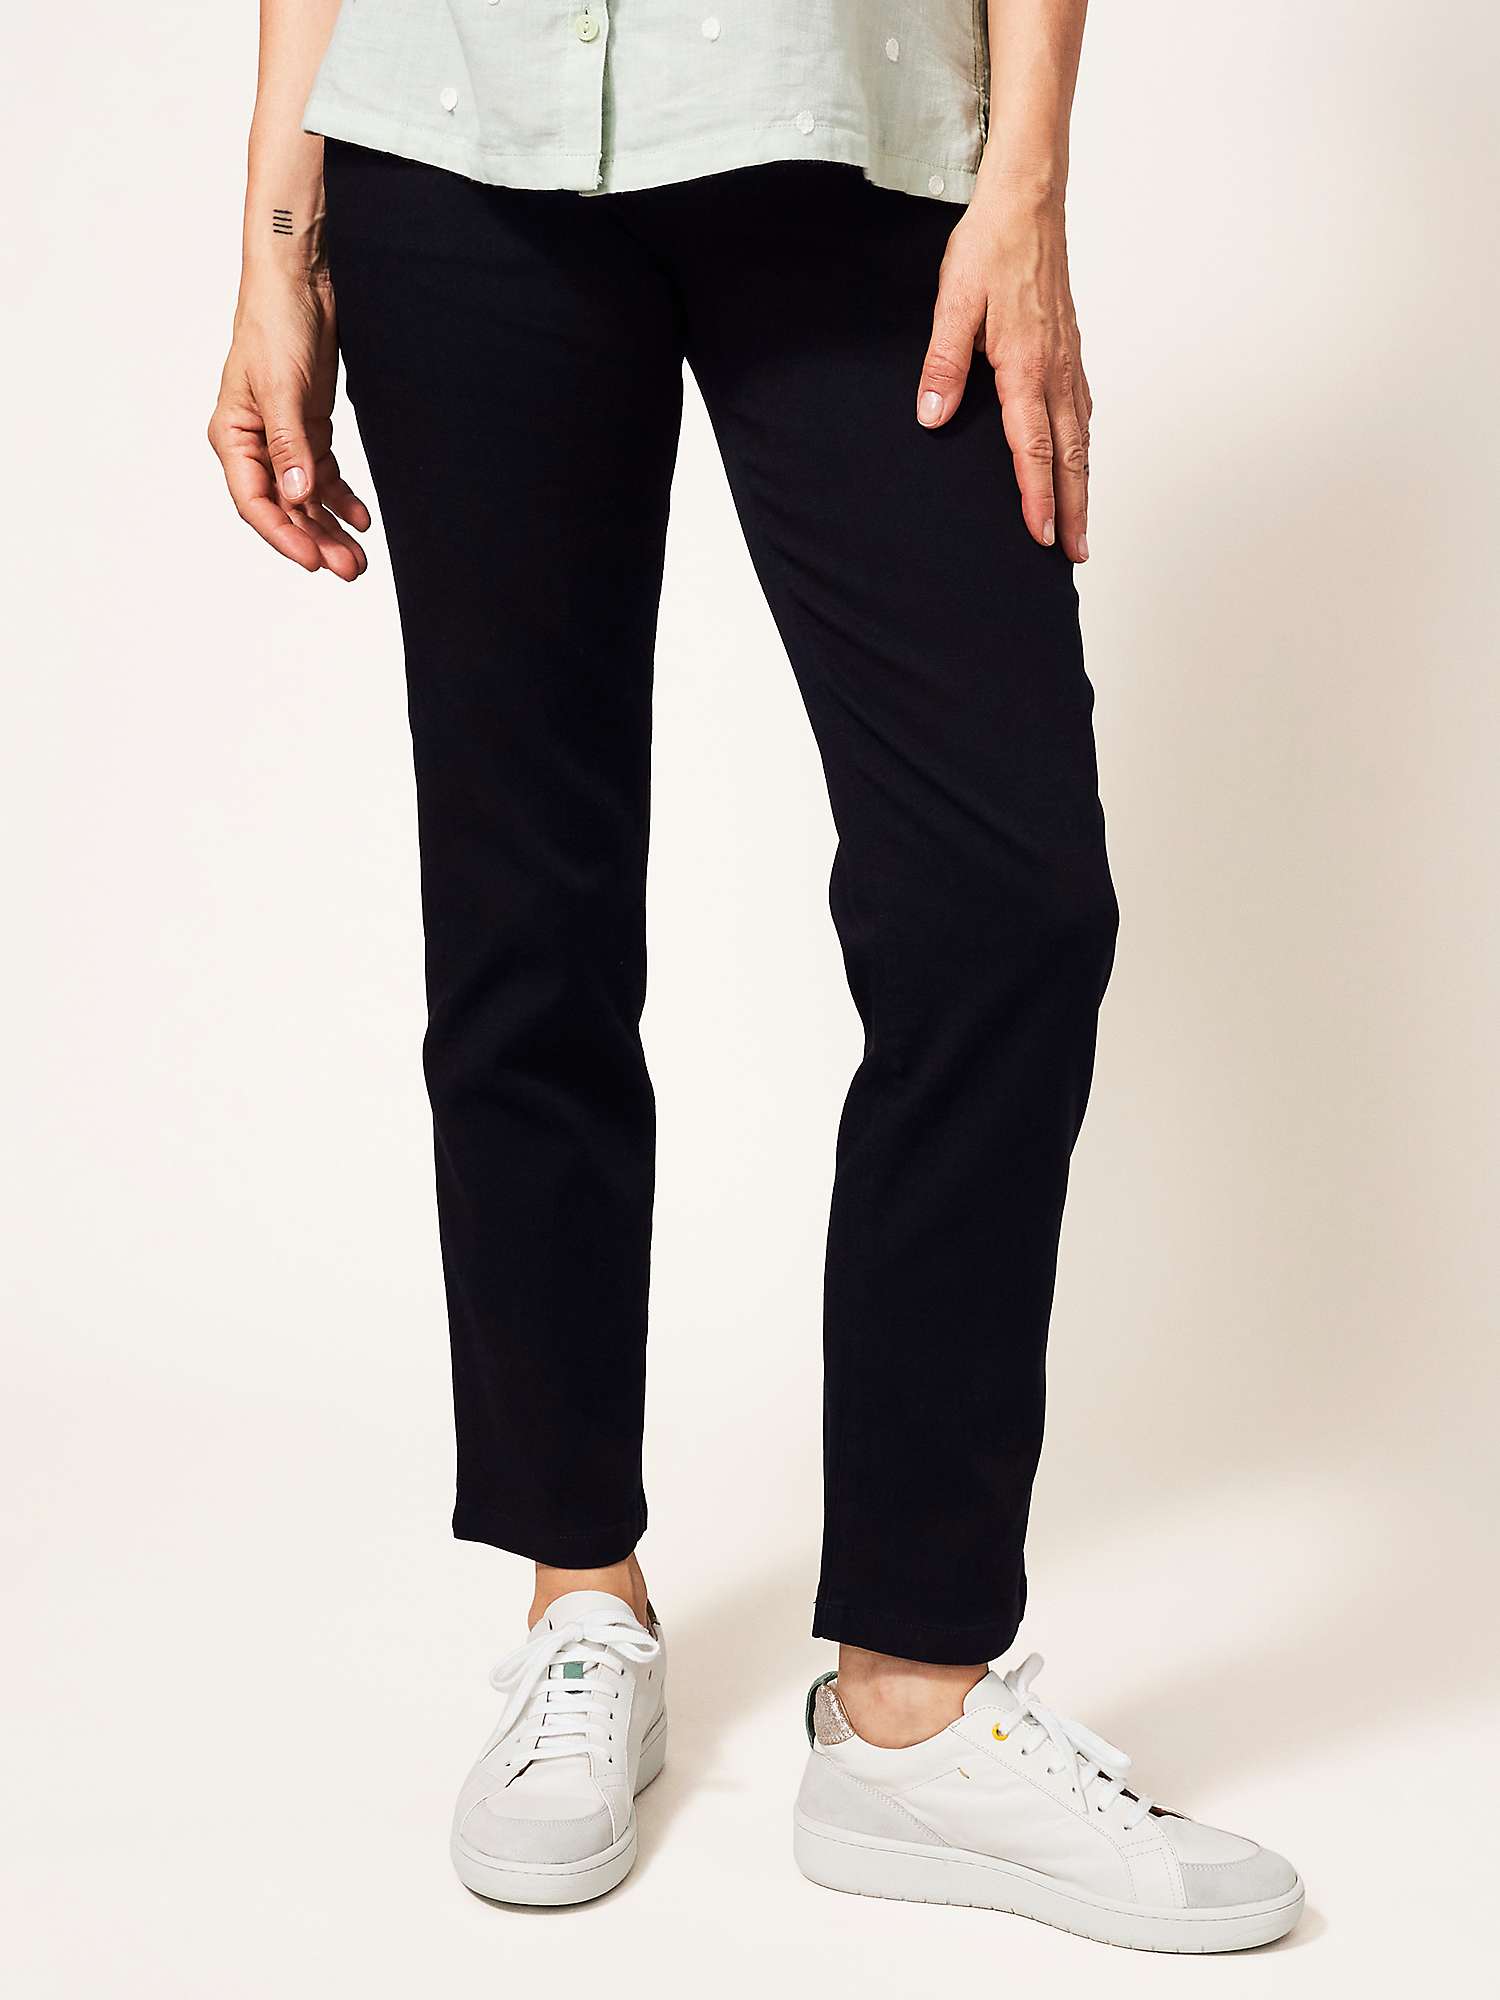 Buy White Stuff Sienna Trousers Online at johnlewis.com